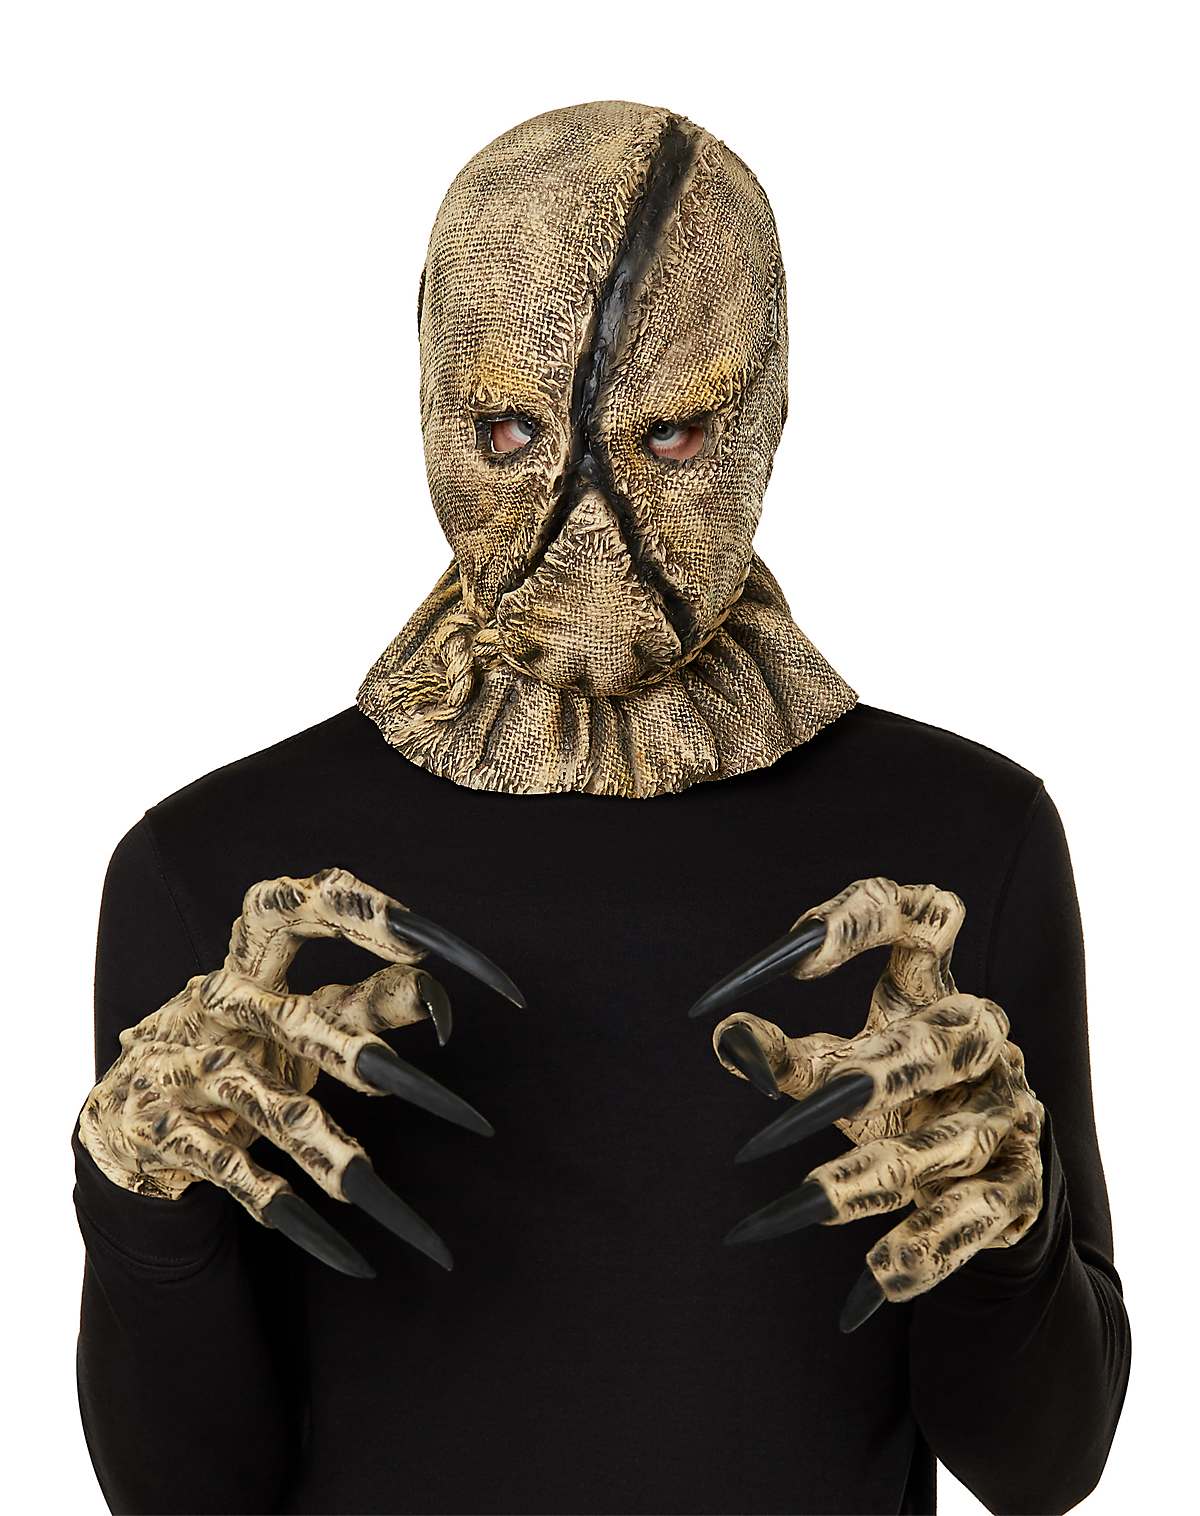 Scarecrow Full Mask with Hands